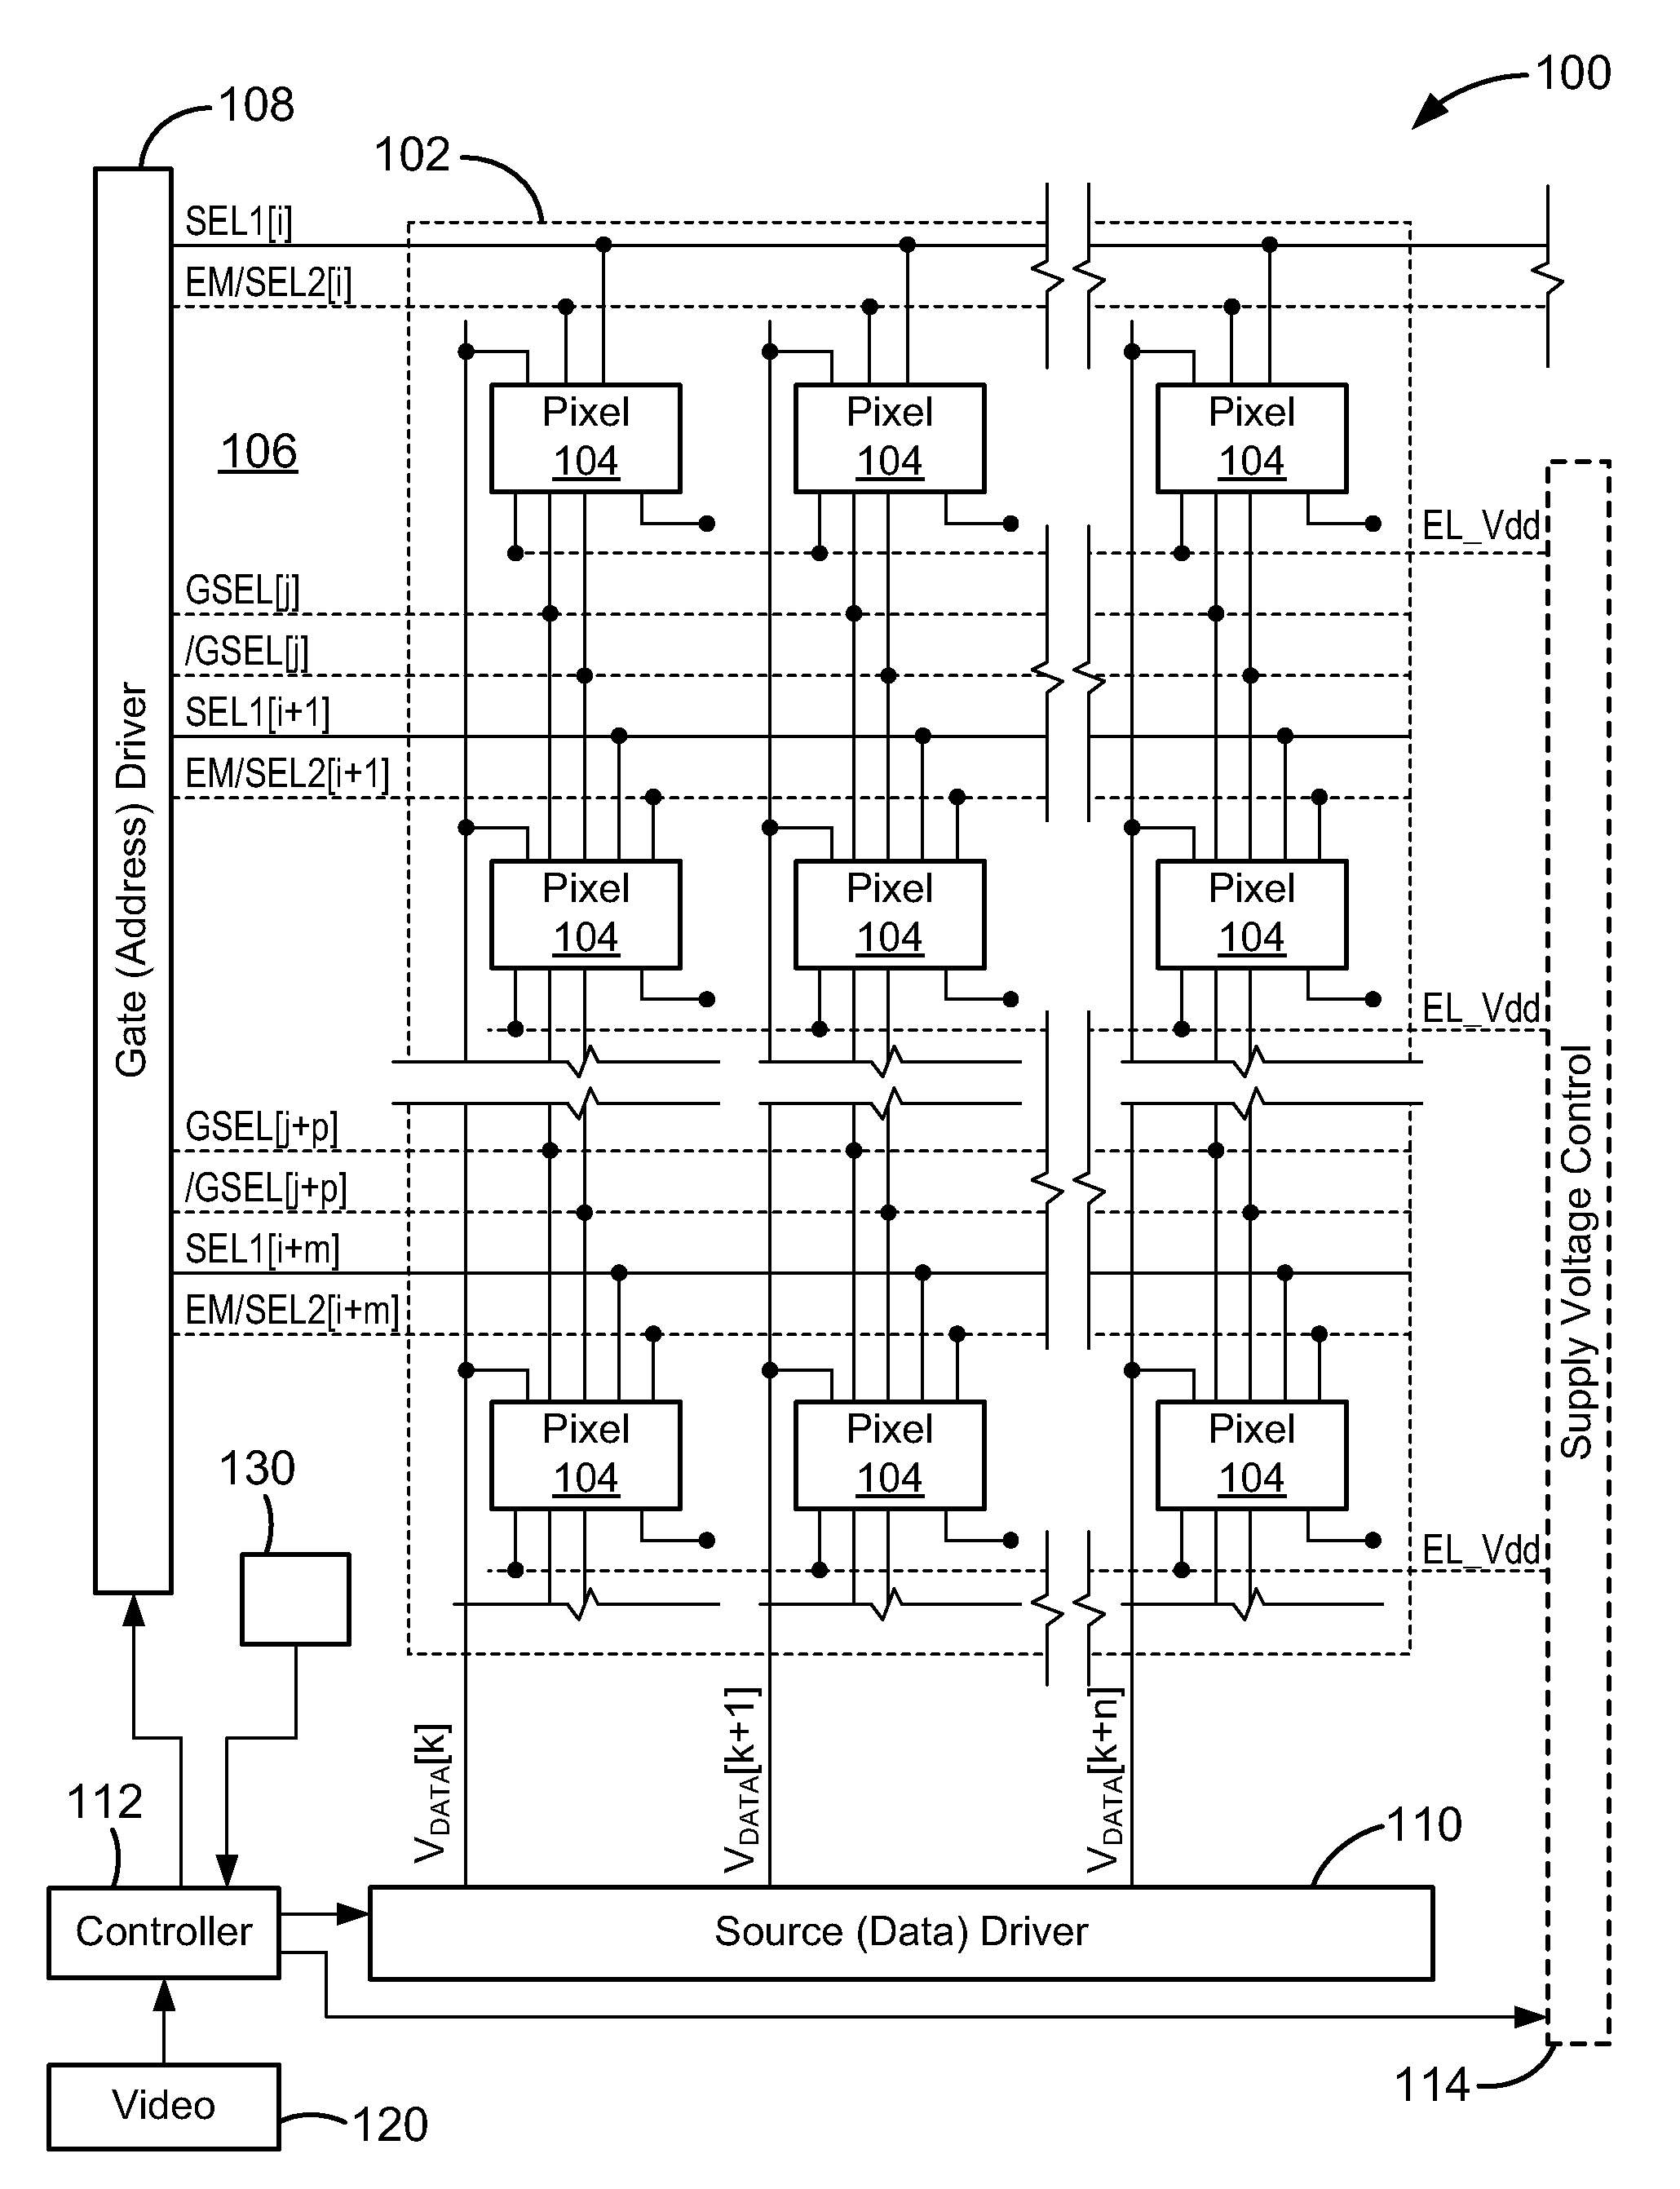 Driving System For Active-Matrix Displays